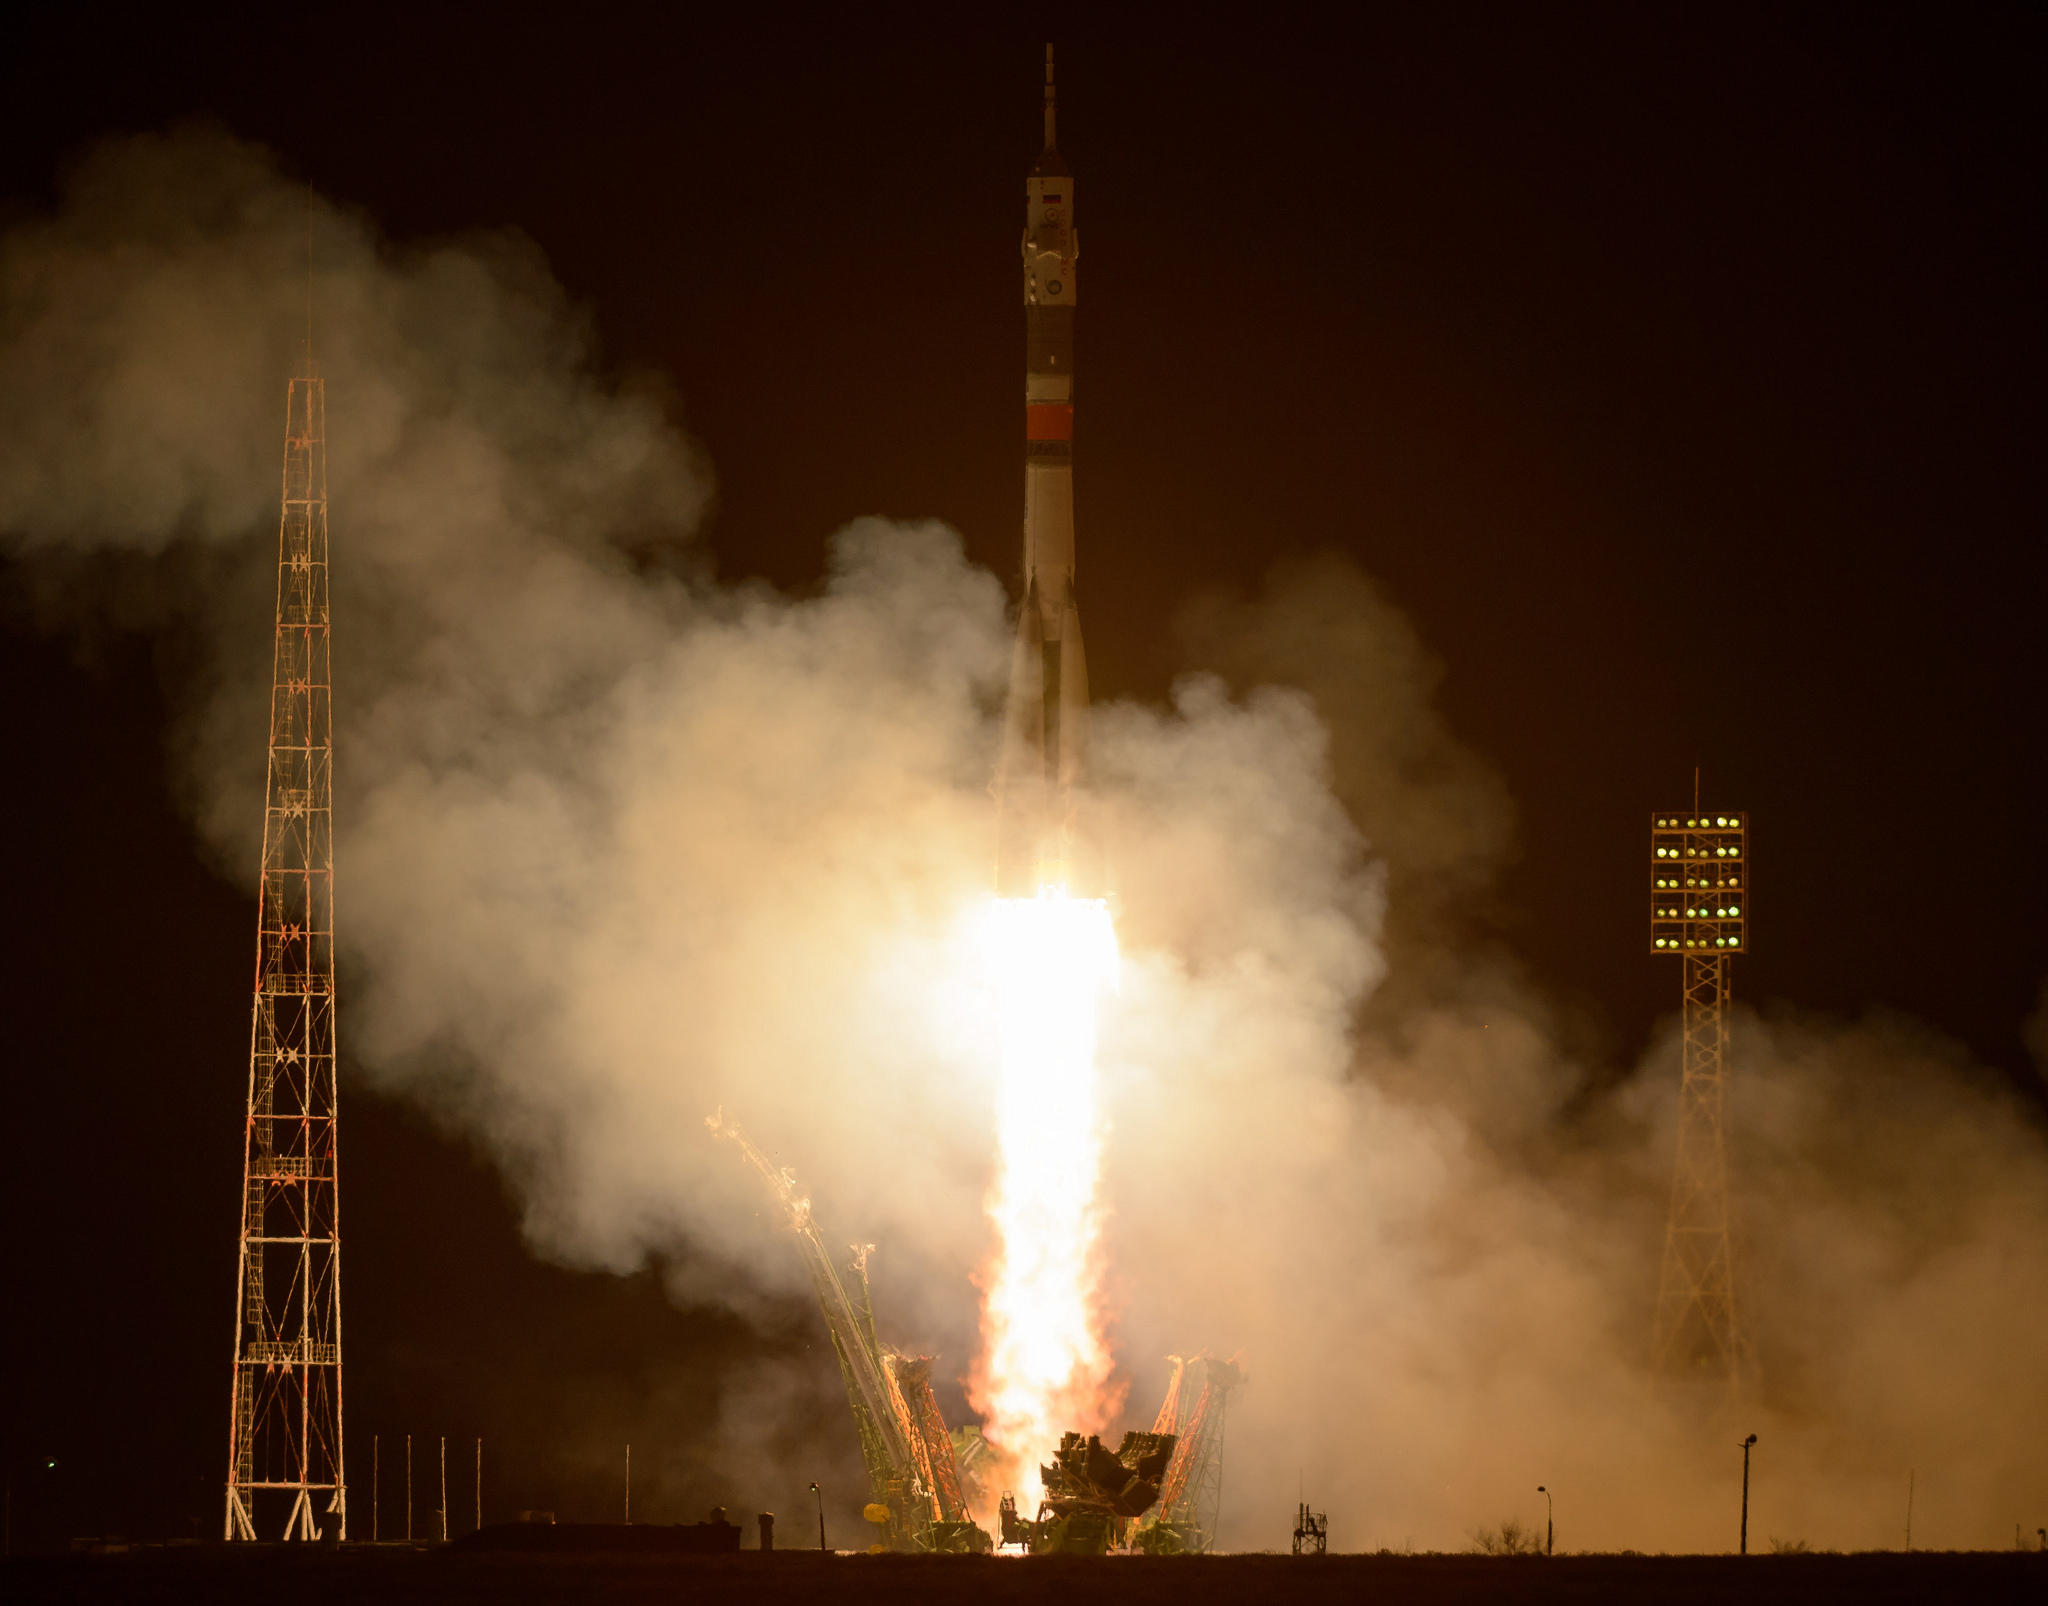 Four crews launching to the ISS